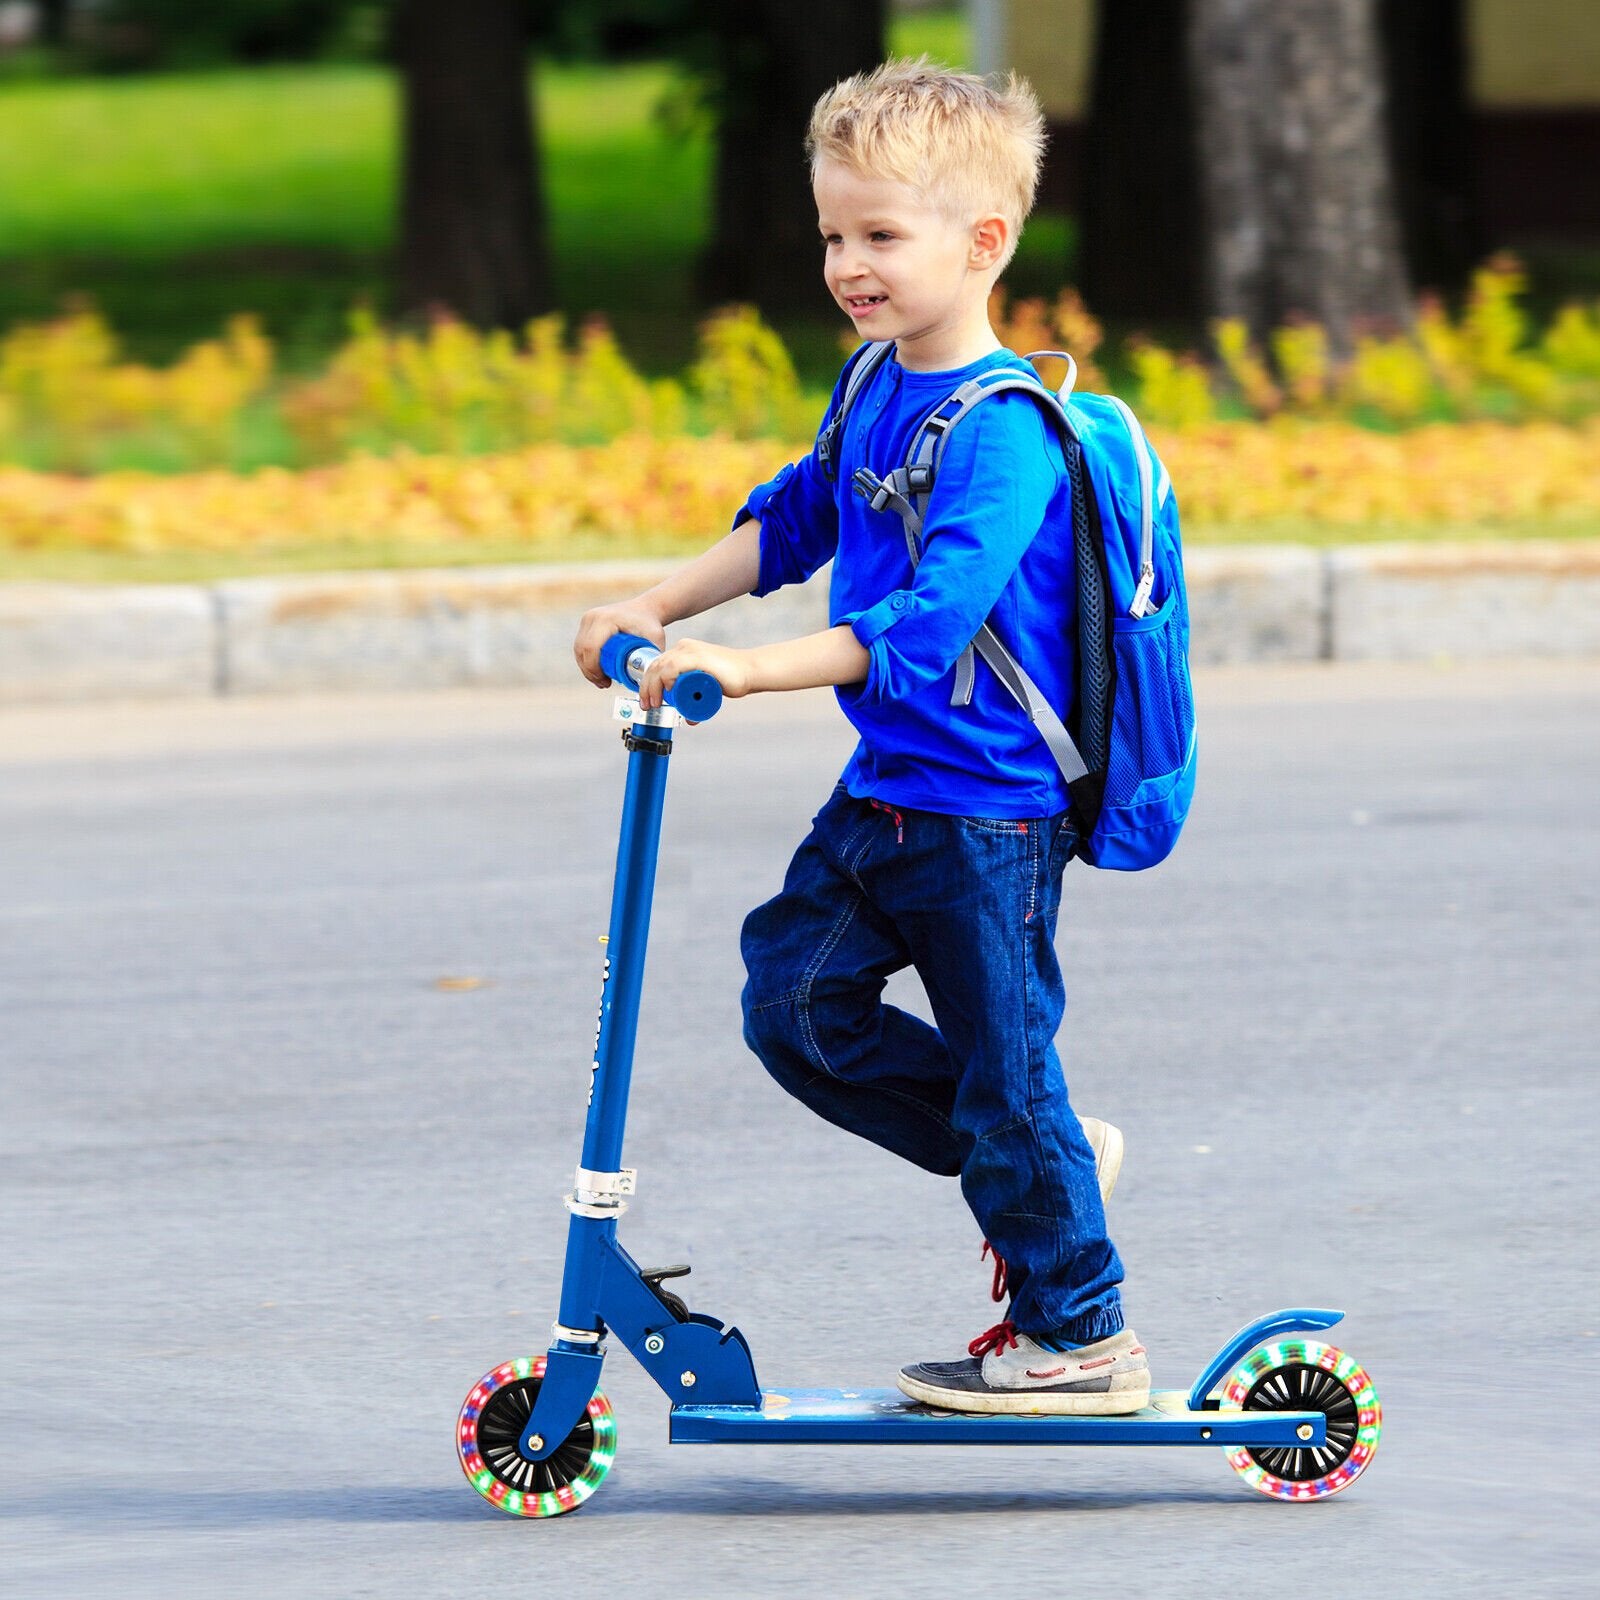 Folding Adjustable Height Kids Toy Kick Scooter with 2 Flashing Wheels, Blue at Gallery Canada